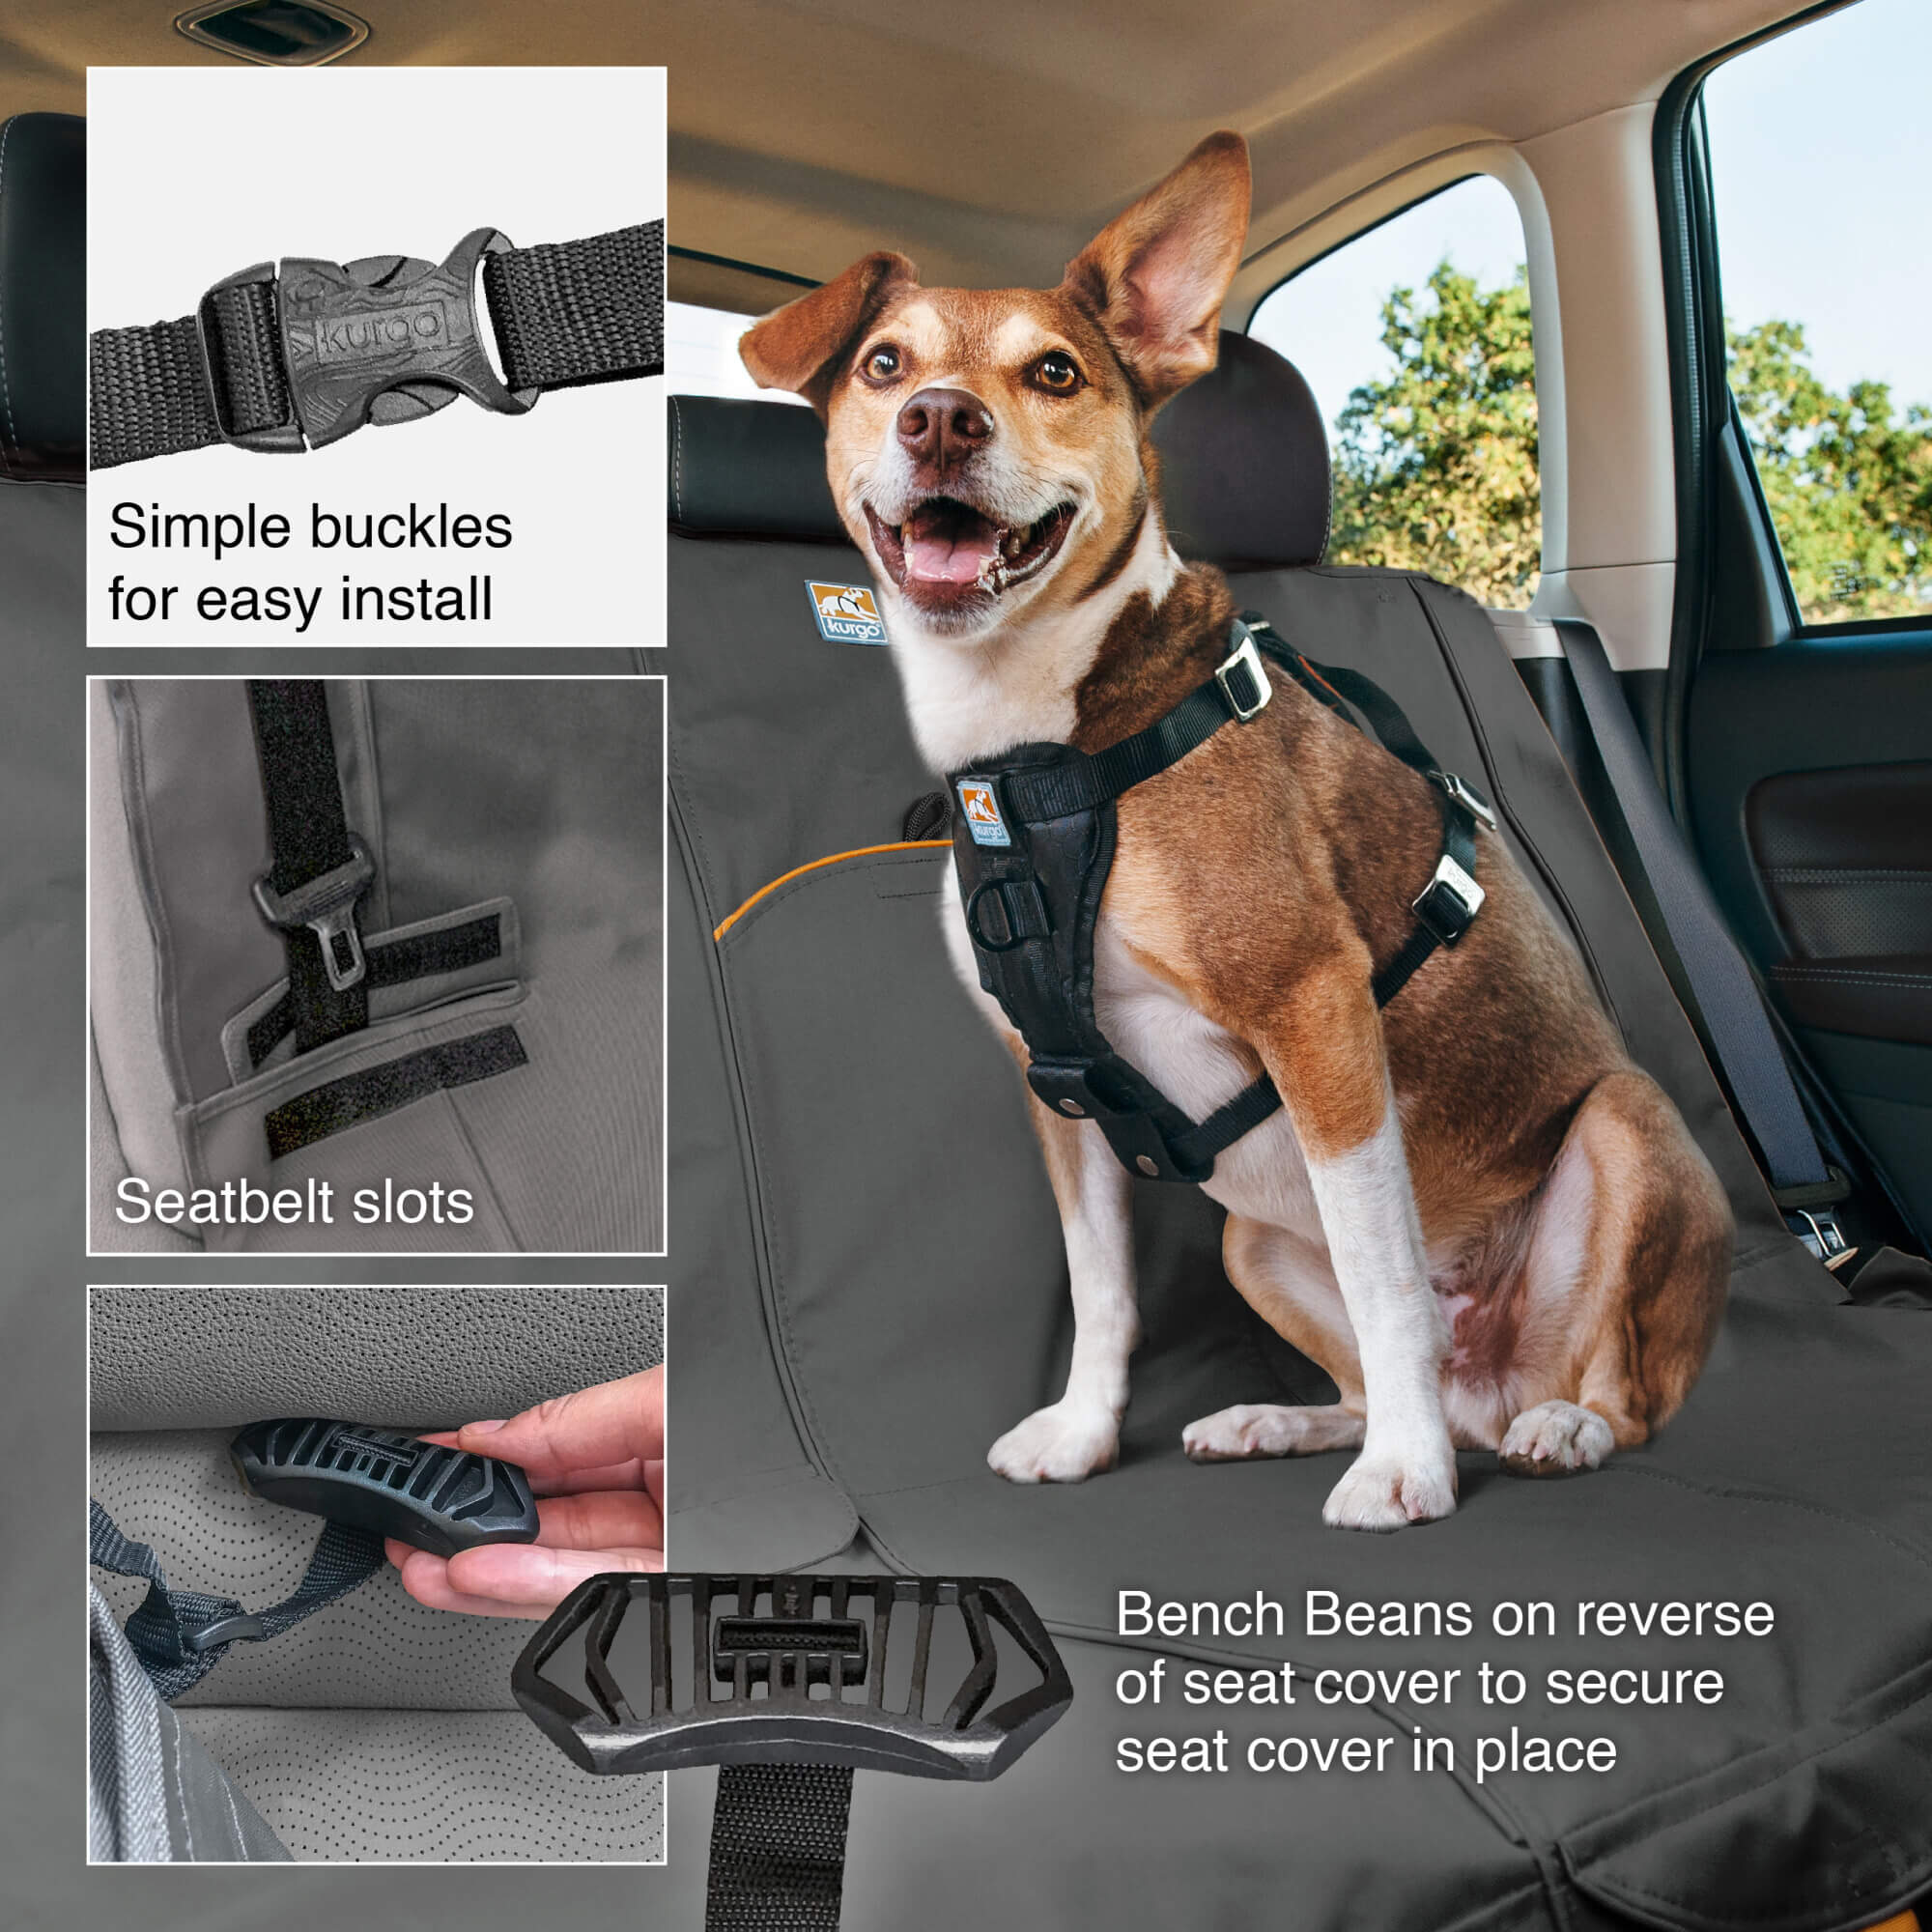 Information chart with dog on kurgo wander bench seat cover